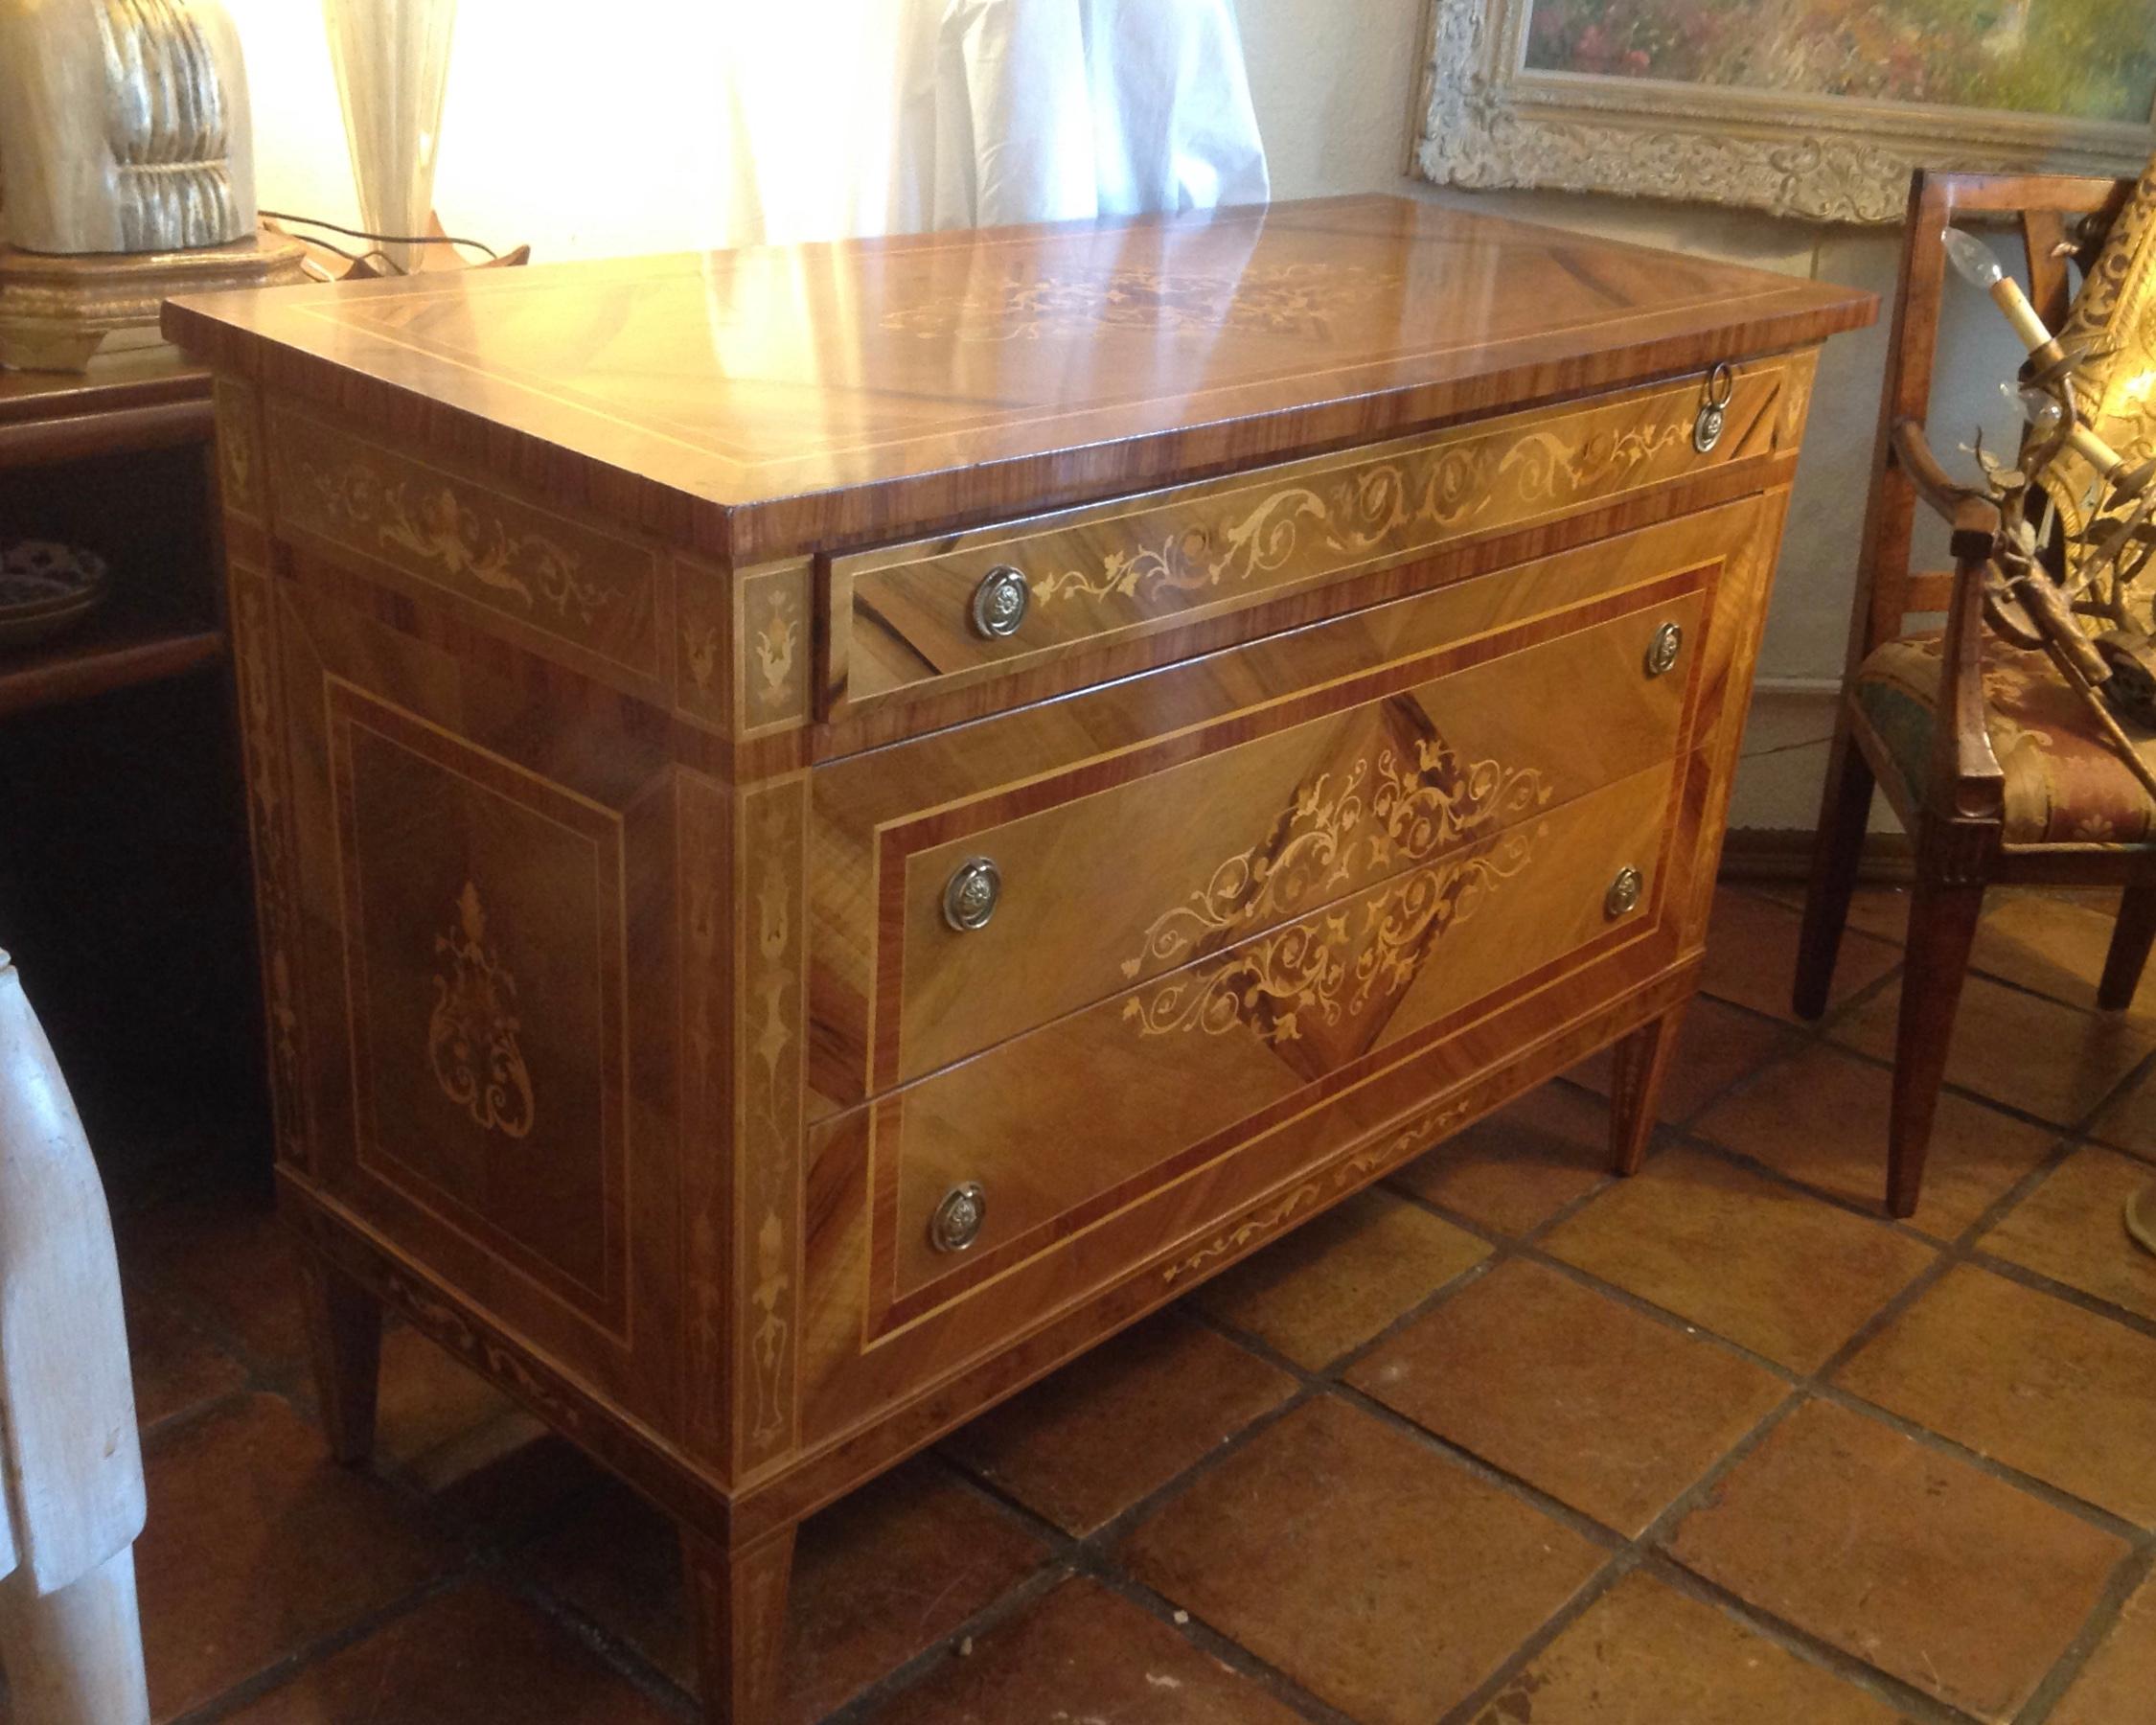 A fine and generously scaled commode. Fashioned in the Sorrento style with elaborate
inlays and contrasting veneers. Exquisite quality and details thru out. Nicely finished
drawer interiors.